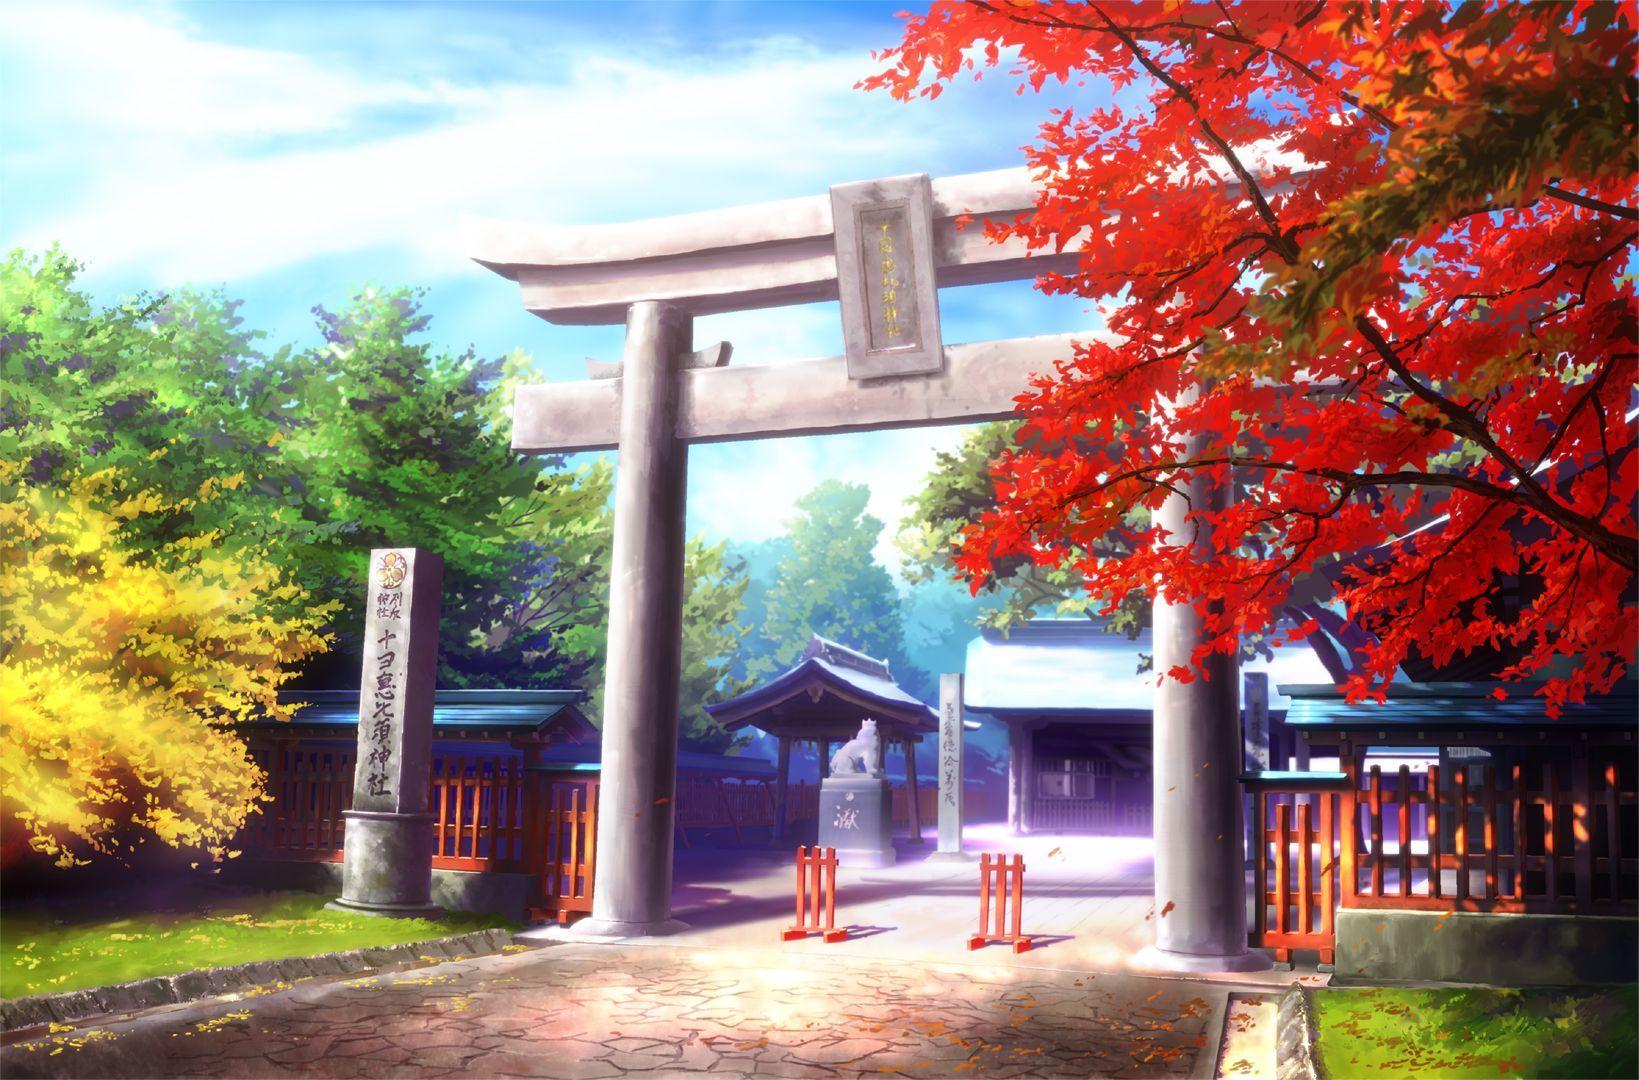 1103755 trees, forest, mountains, Asian architecture, anime girls,  building, snow, winter, dress, house, original characters, Christmas, arch,  shrine, miko, weather, season - Rare Gallery HD Wallpapers